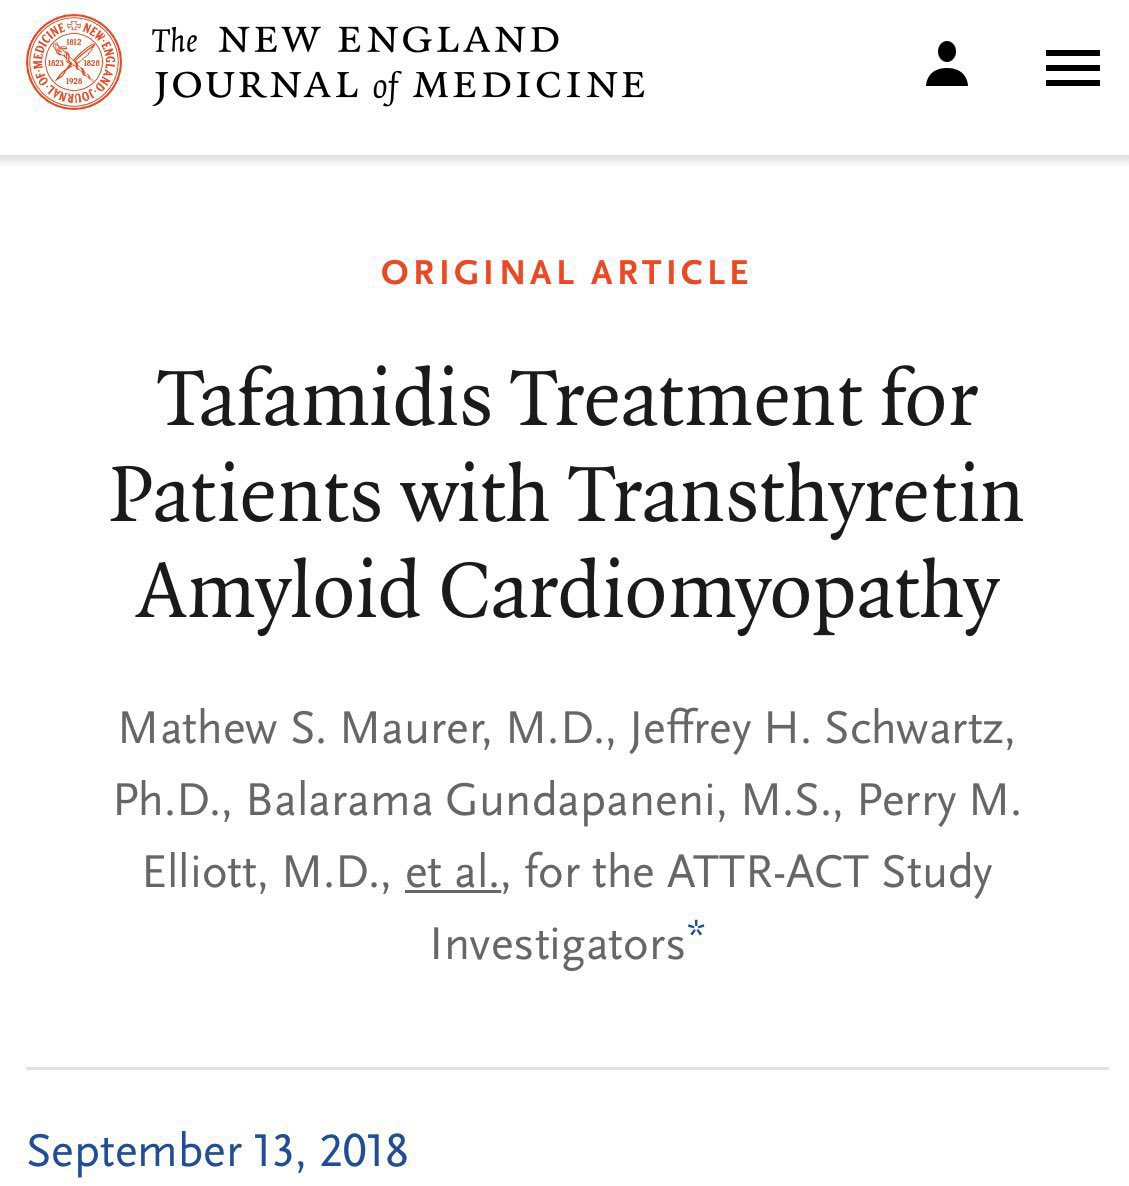 A targeted therapy towards cardiac amyloidosis? This landmark trial showed tafamidis (a transthyretin binder) to reduce mortality and hospitalization in transthyretin cardiac amyloidosis, prompting earlier screening for this life-threatening disorder. ATTR-ACT Trial, NEJM 2018 ♥️